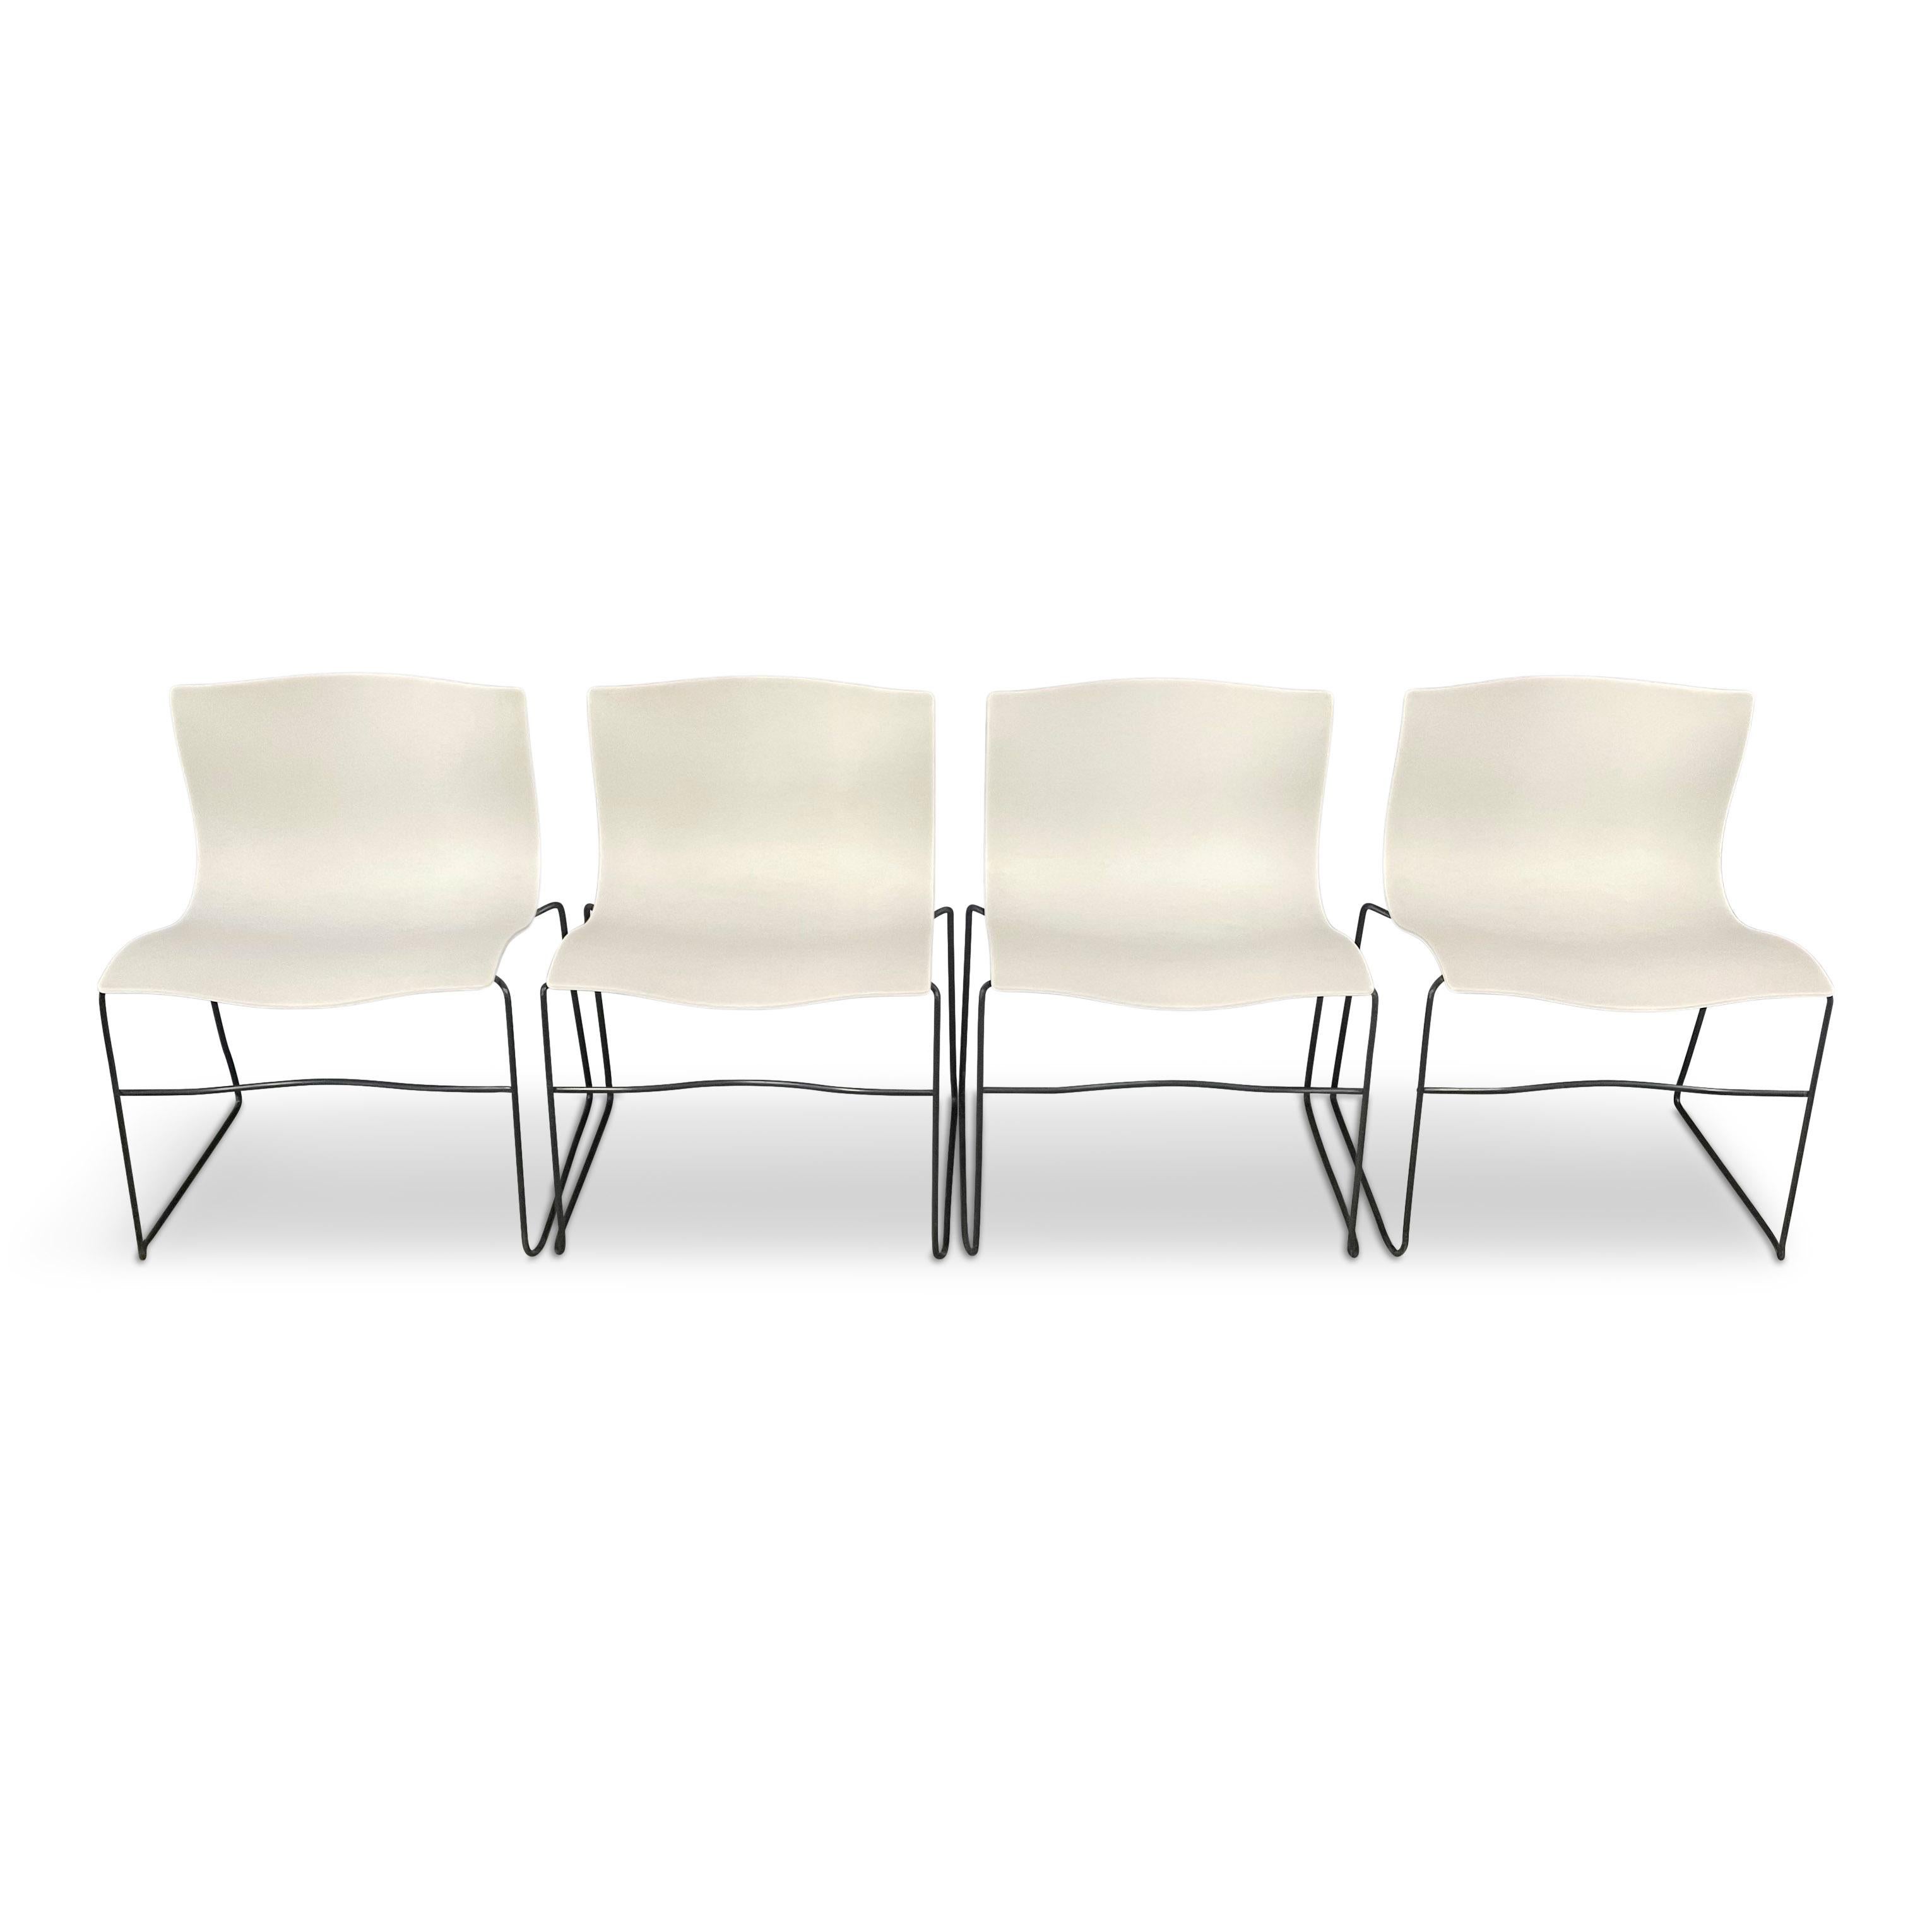 European Handkerchief Chairs in White by Massimo Vignelli for Knoll Post Modern For Sale